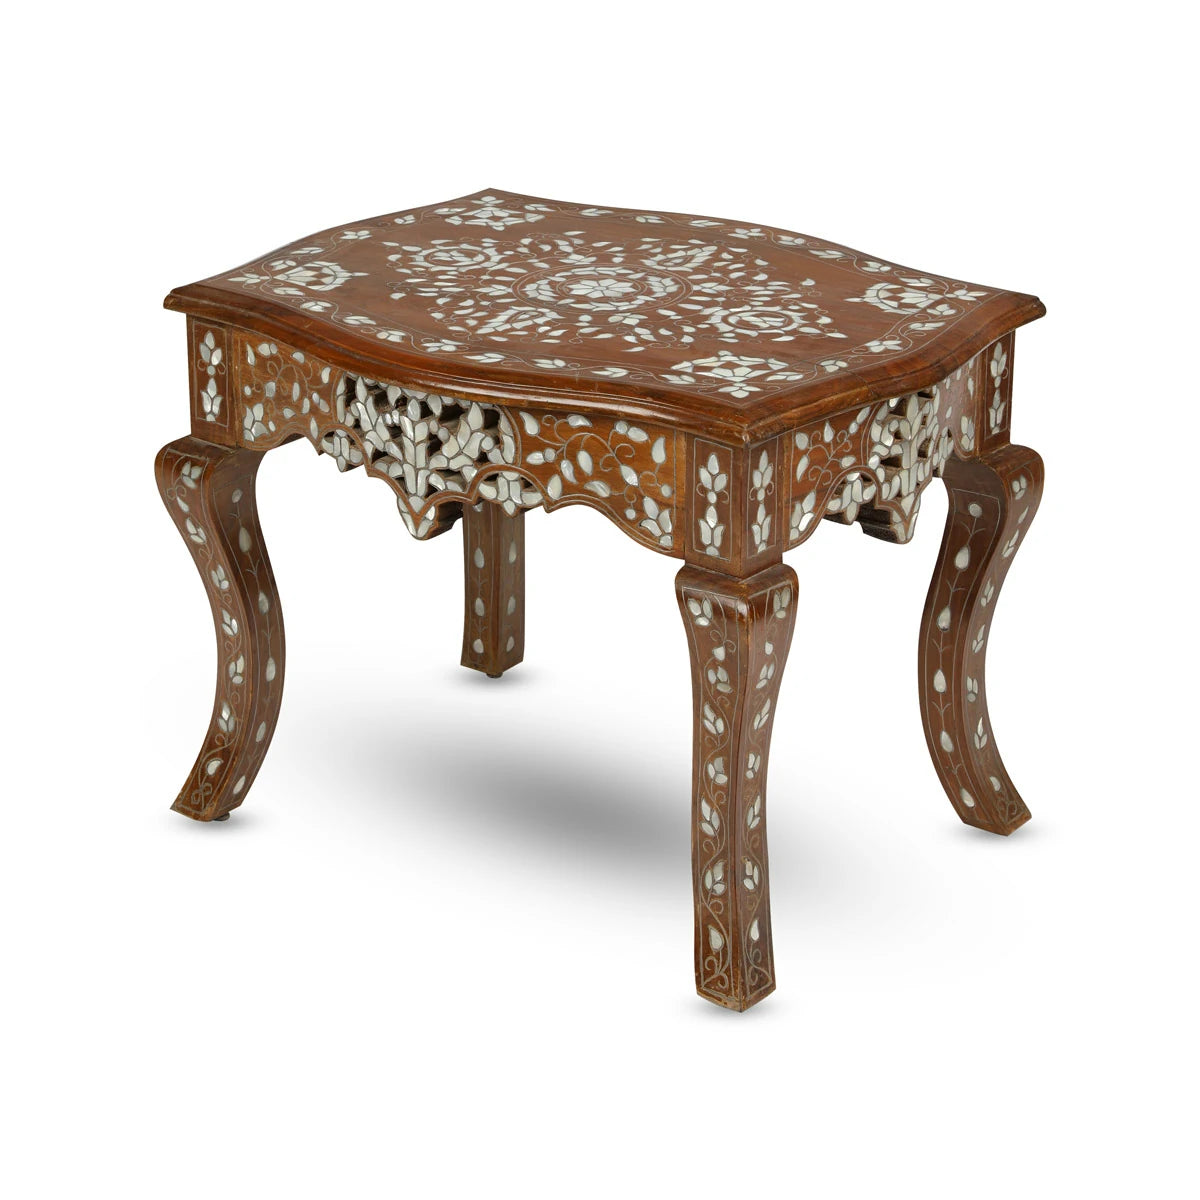 Artistic Syrian Side Table With Metallic Linings & Mother of Pearl Inlays in Floristic Motifs